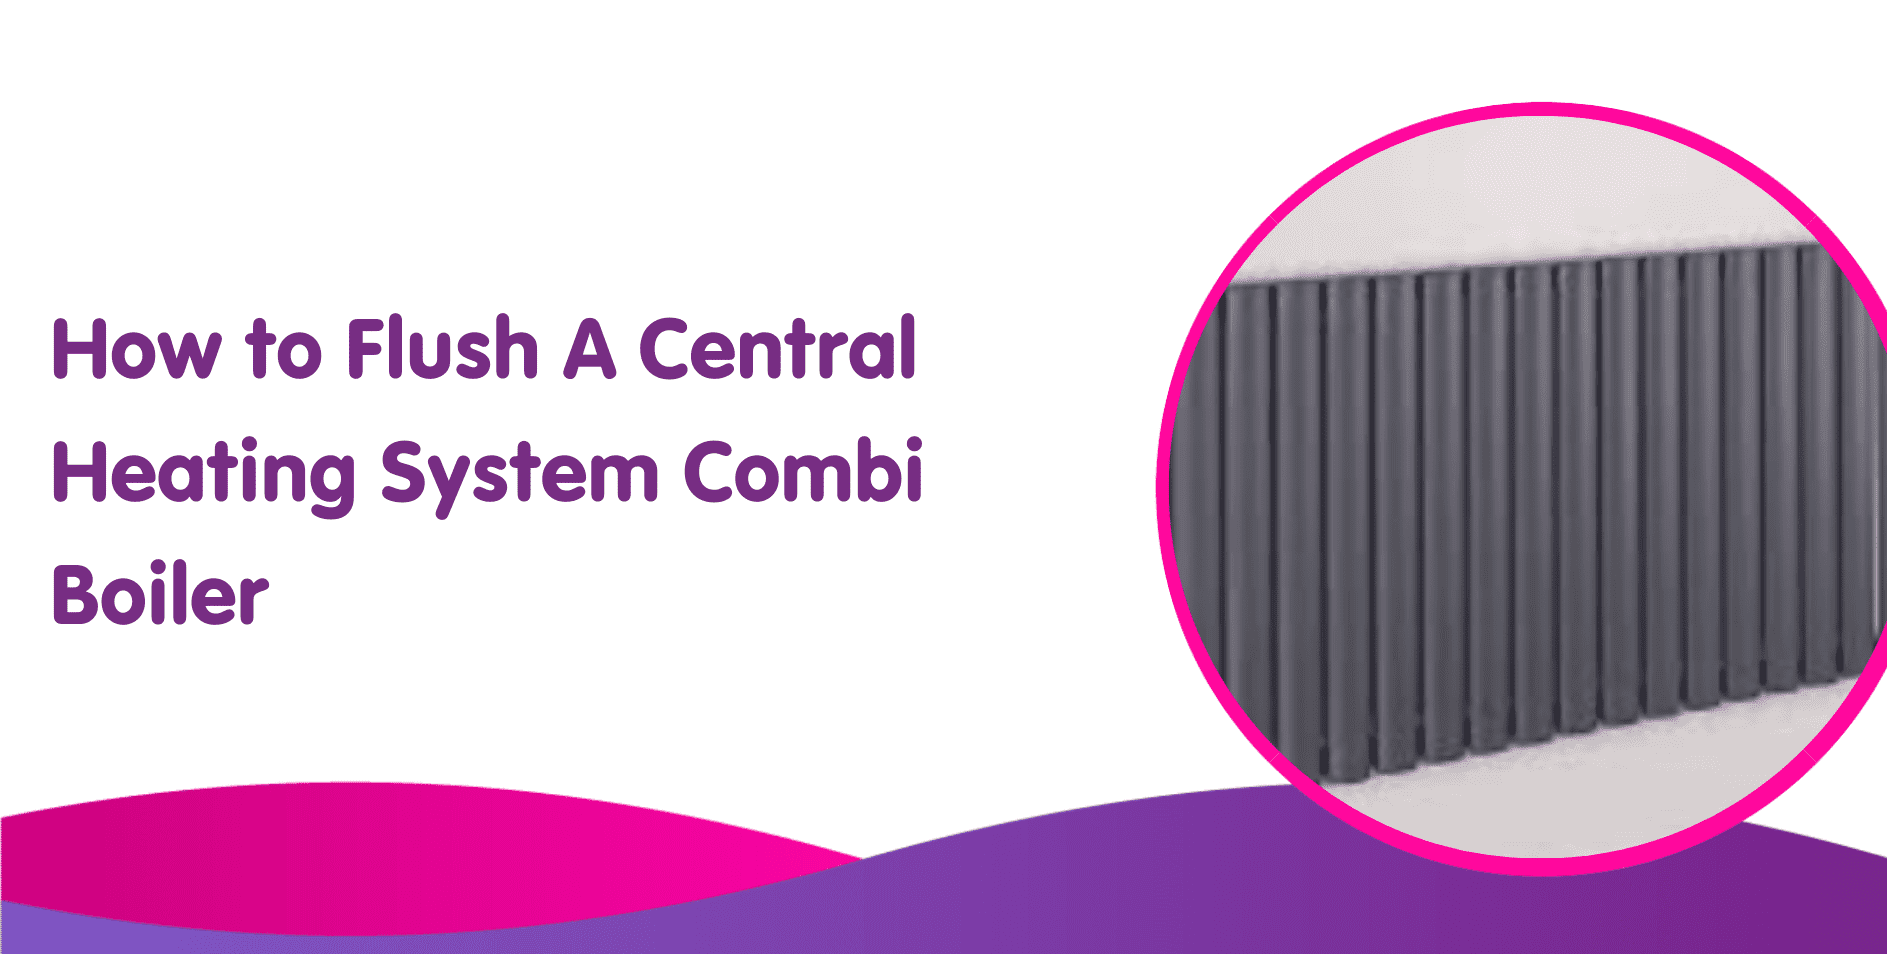 How to Flush A Central Heating System Combi Boiler